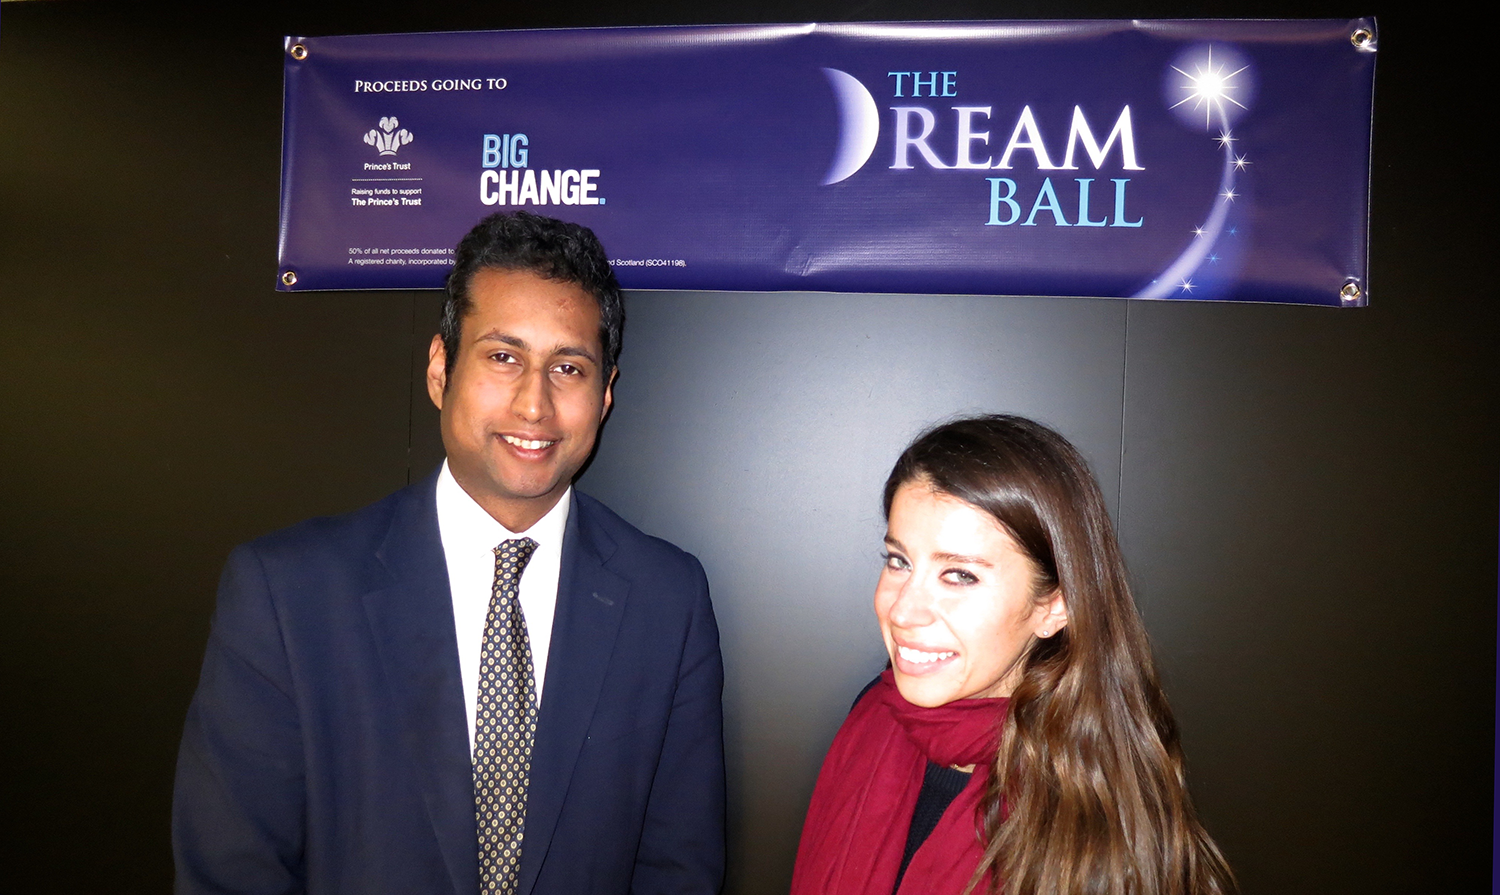 BBC Apprentice Star joins Dream Ball committee